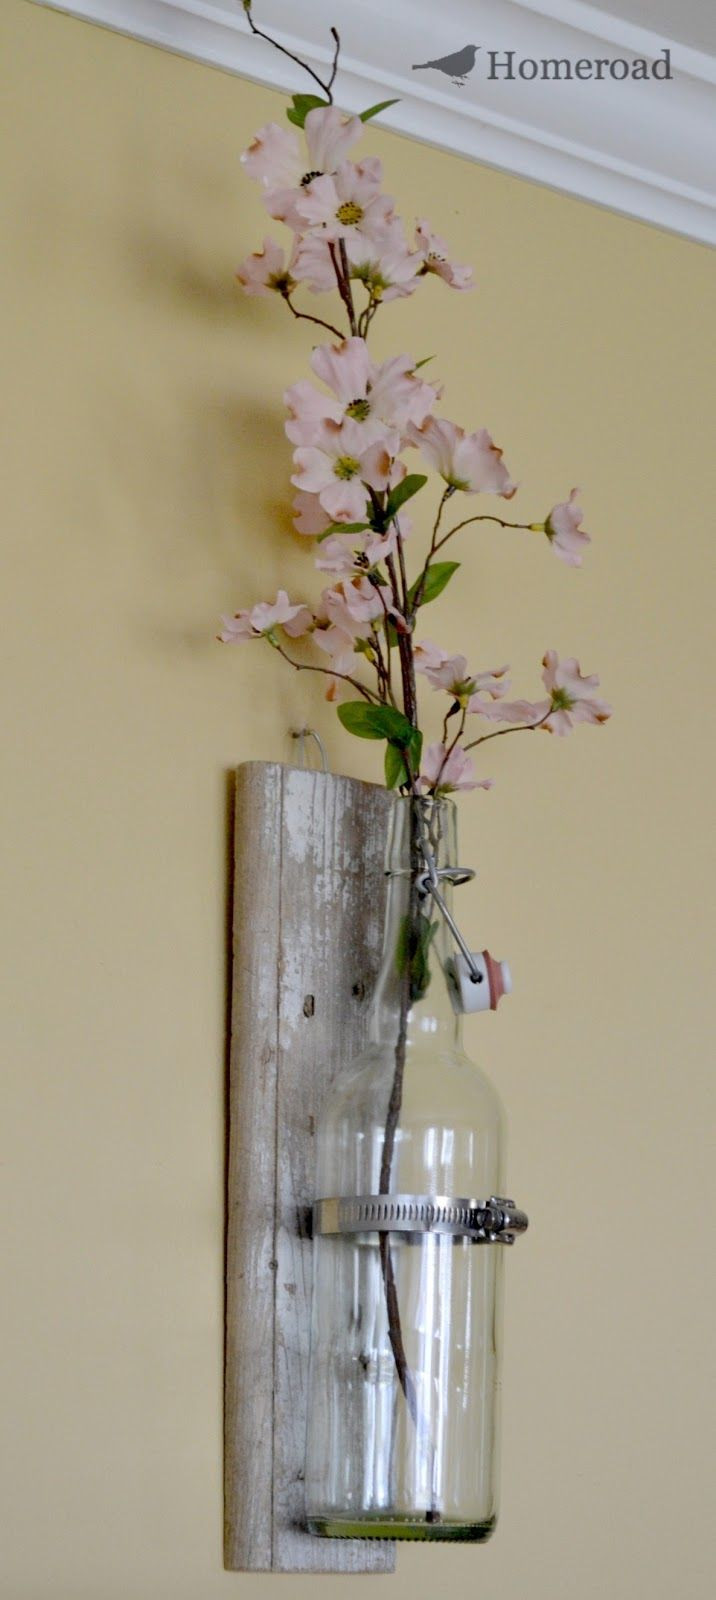 15 Fashionable Wine Bottle Vase Wall Mount 2024 free download wine bottle vase wall mount of rustic wall vase pinterest rustic walls walls and craft throughout homeroad rustic wall vase